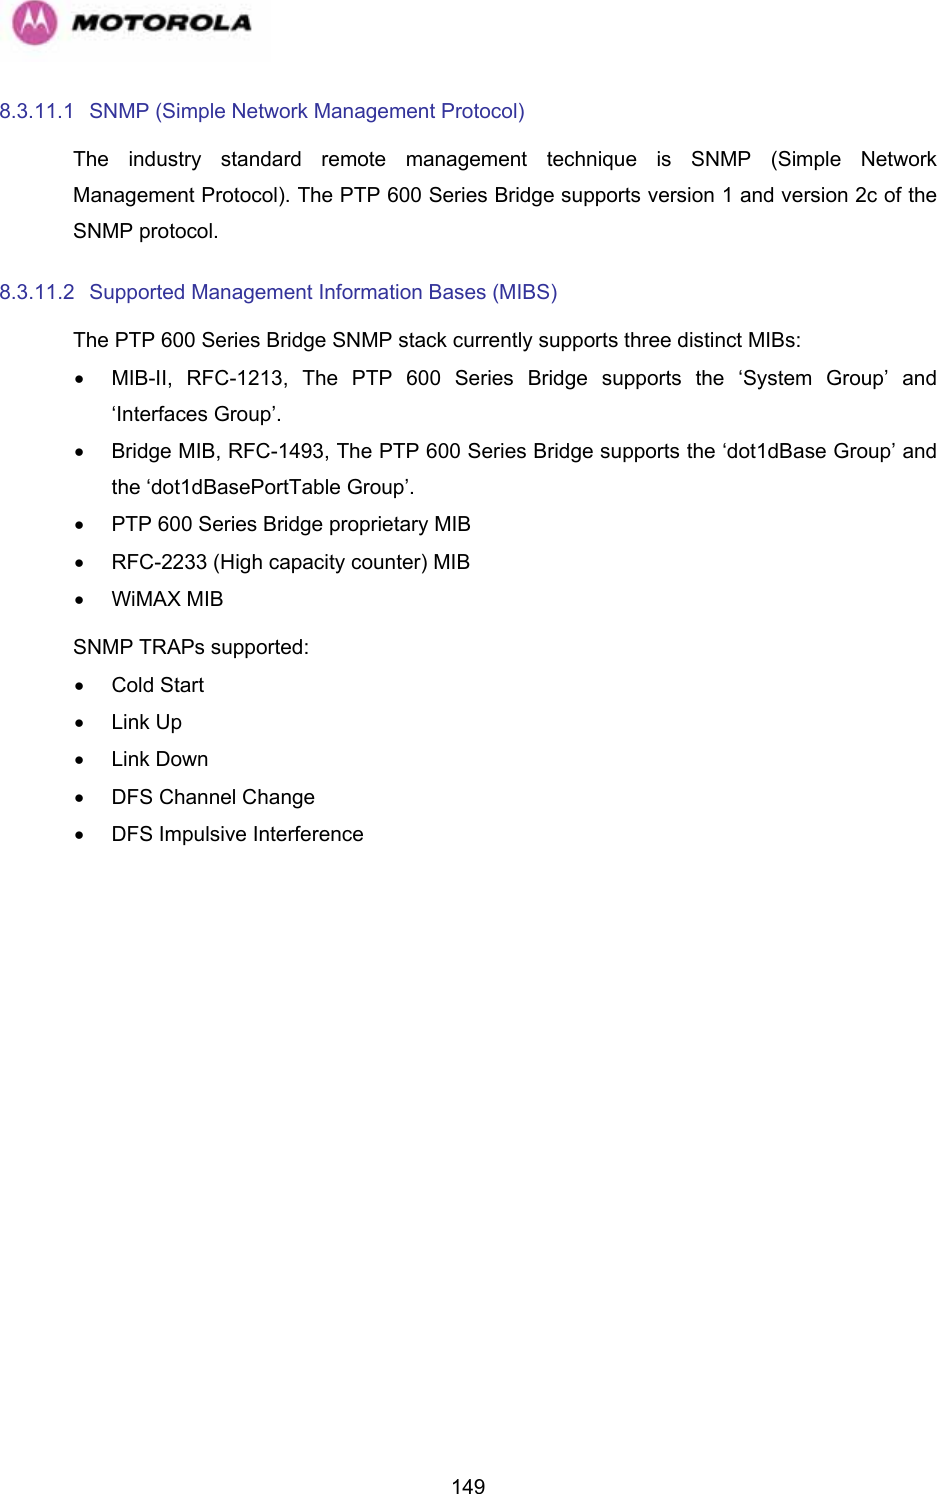   1498.3.11.1  SNMP (Simple Network Management Protocol) The industry standard remote management technique is SNMP (Simple Network Management Protocol). The PTP 600 Series Bridge supports version 1 and version 2c of the SNMP protocol. 8.3.11.2  Supported Management Information Bases (MIBS) The PTP 600 Series Bridge SNMP stack currently supports three distinct MIBs: •  MIB-II, RFC-1213, The PTP 600 Series Bridge supports the ‘System Group’ and ‘Interfaces Group’. •  Bridge MIB, RFC-1493, The PTP 600 Series Bridge supports the ‘dot1dBase Group’ and the ‘dot1dBasePortTable Group’. •  PTP 600 Series Bridge proprietary MIB •  RFC-2233 (High capacity counter) MIB • WiMAX MIB SNMP TRAPs supported: • Cold Start • Link Up • Link Down •  DFS Channel Change  •  DFS Impulsive Interference 